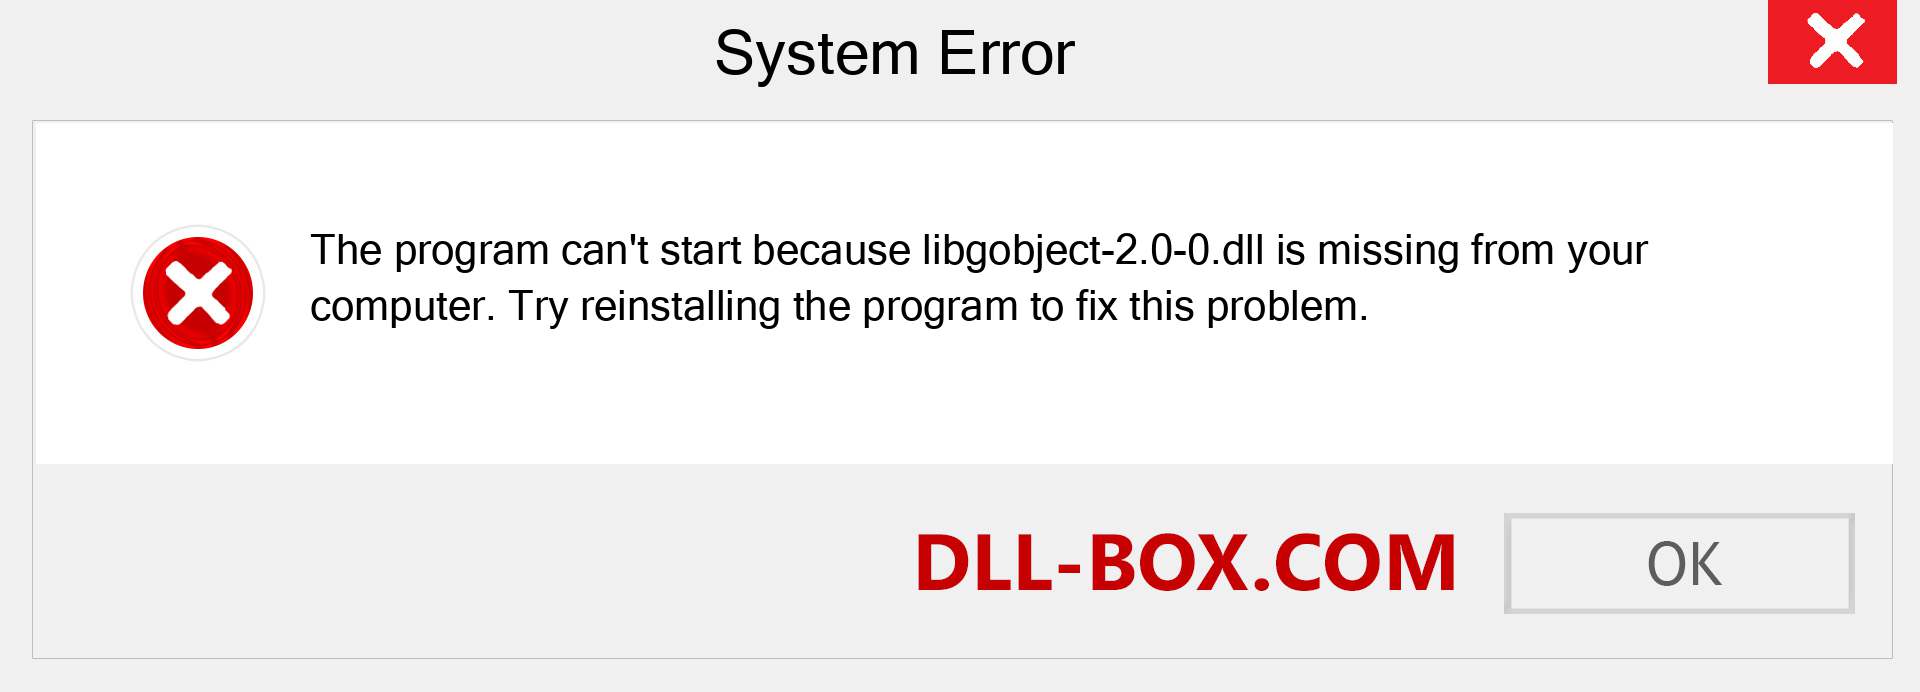  libgobject-2.0-0.dll file is missing?. Download for Windows 7, 8, 10 - Fix  libgobject-2.0-0 dll Missing Error on Windows, photos, images